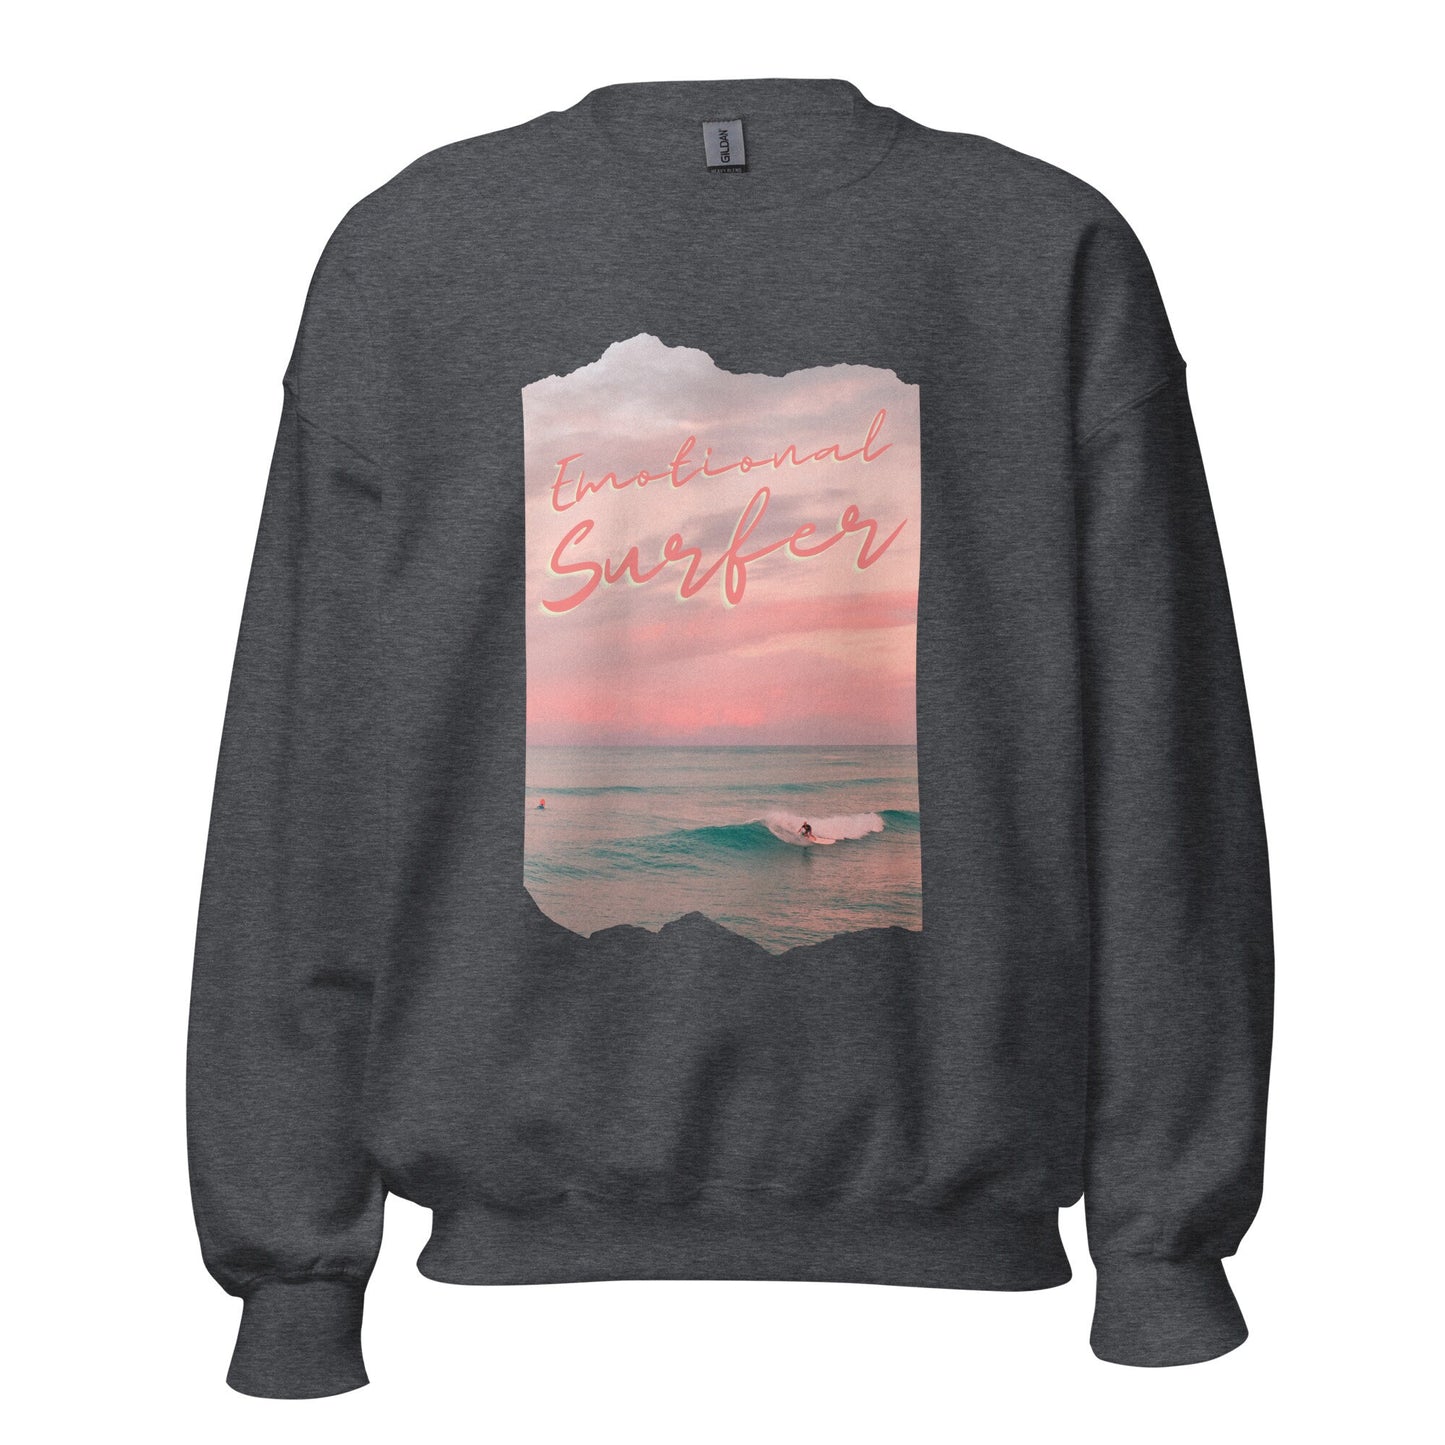 Mental Health Sweatshirt &#39;Emotional Surfer&#39;, part of profit donated to Mental Health Charity, Unisex Sweater, Self Care